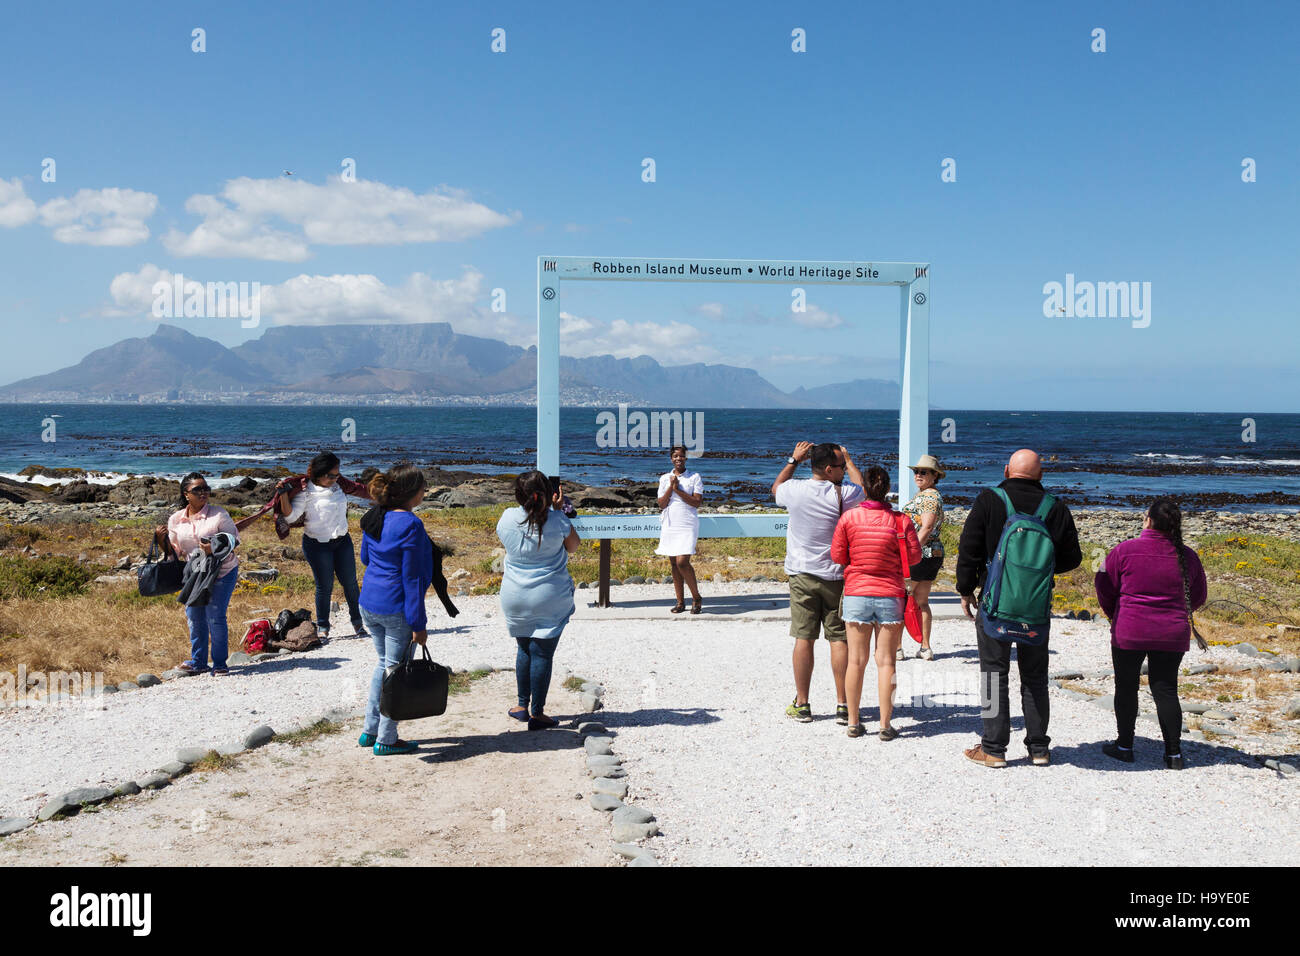 Tourists on Robben Island, Cape Town, South Africa Stock Photo - Alamy